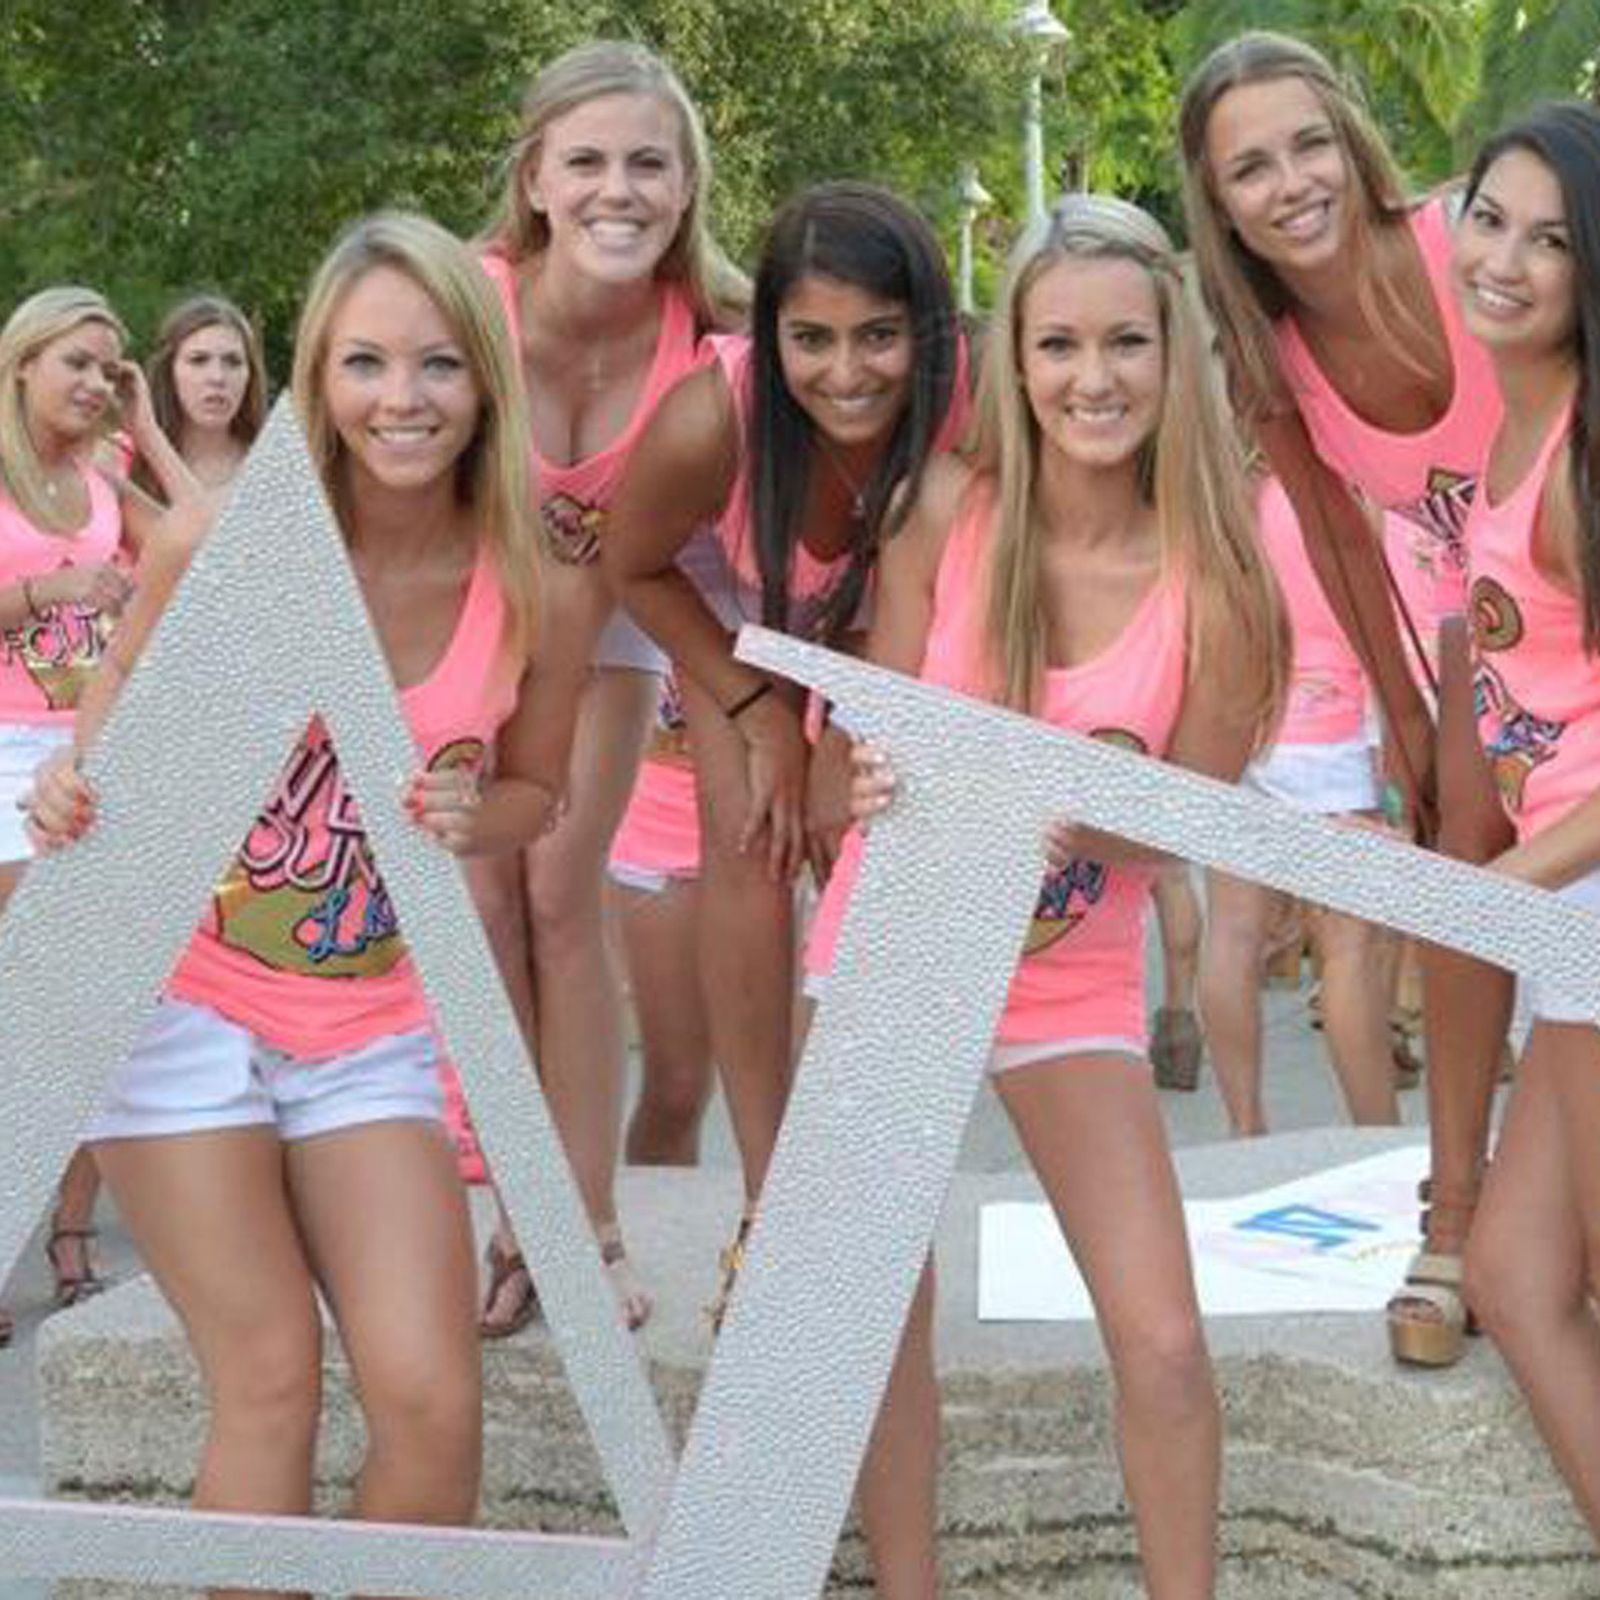 17 Signs You're In A Sorority - What It's Like To Be In A Sorority